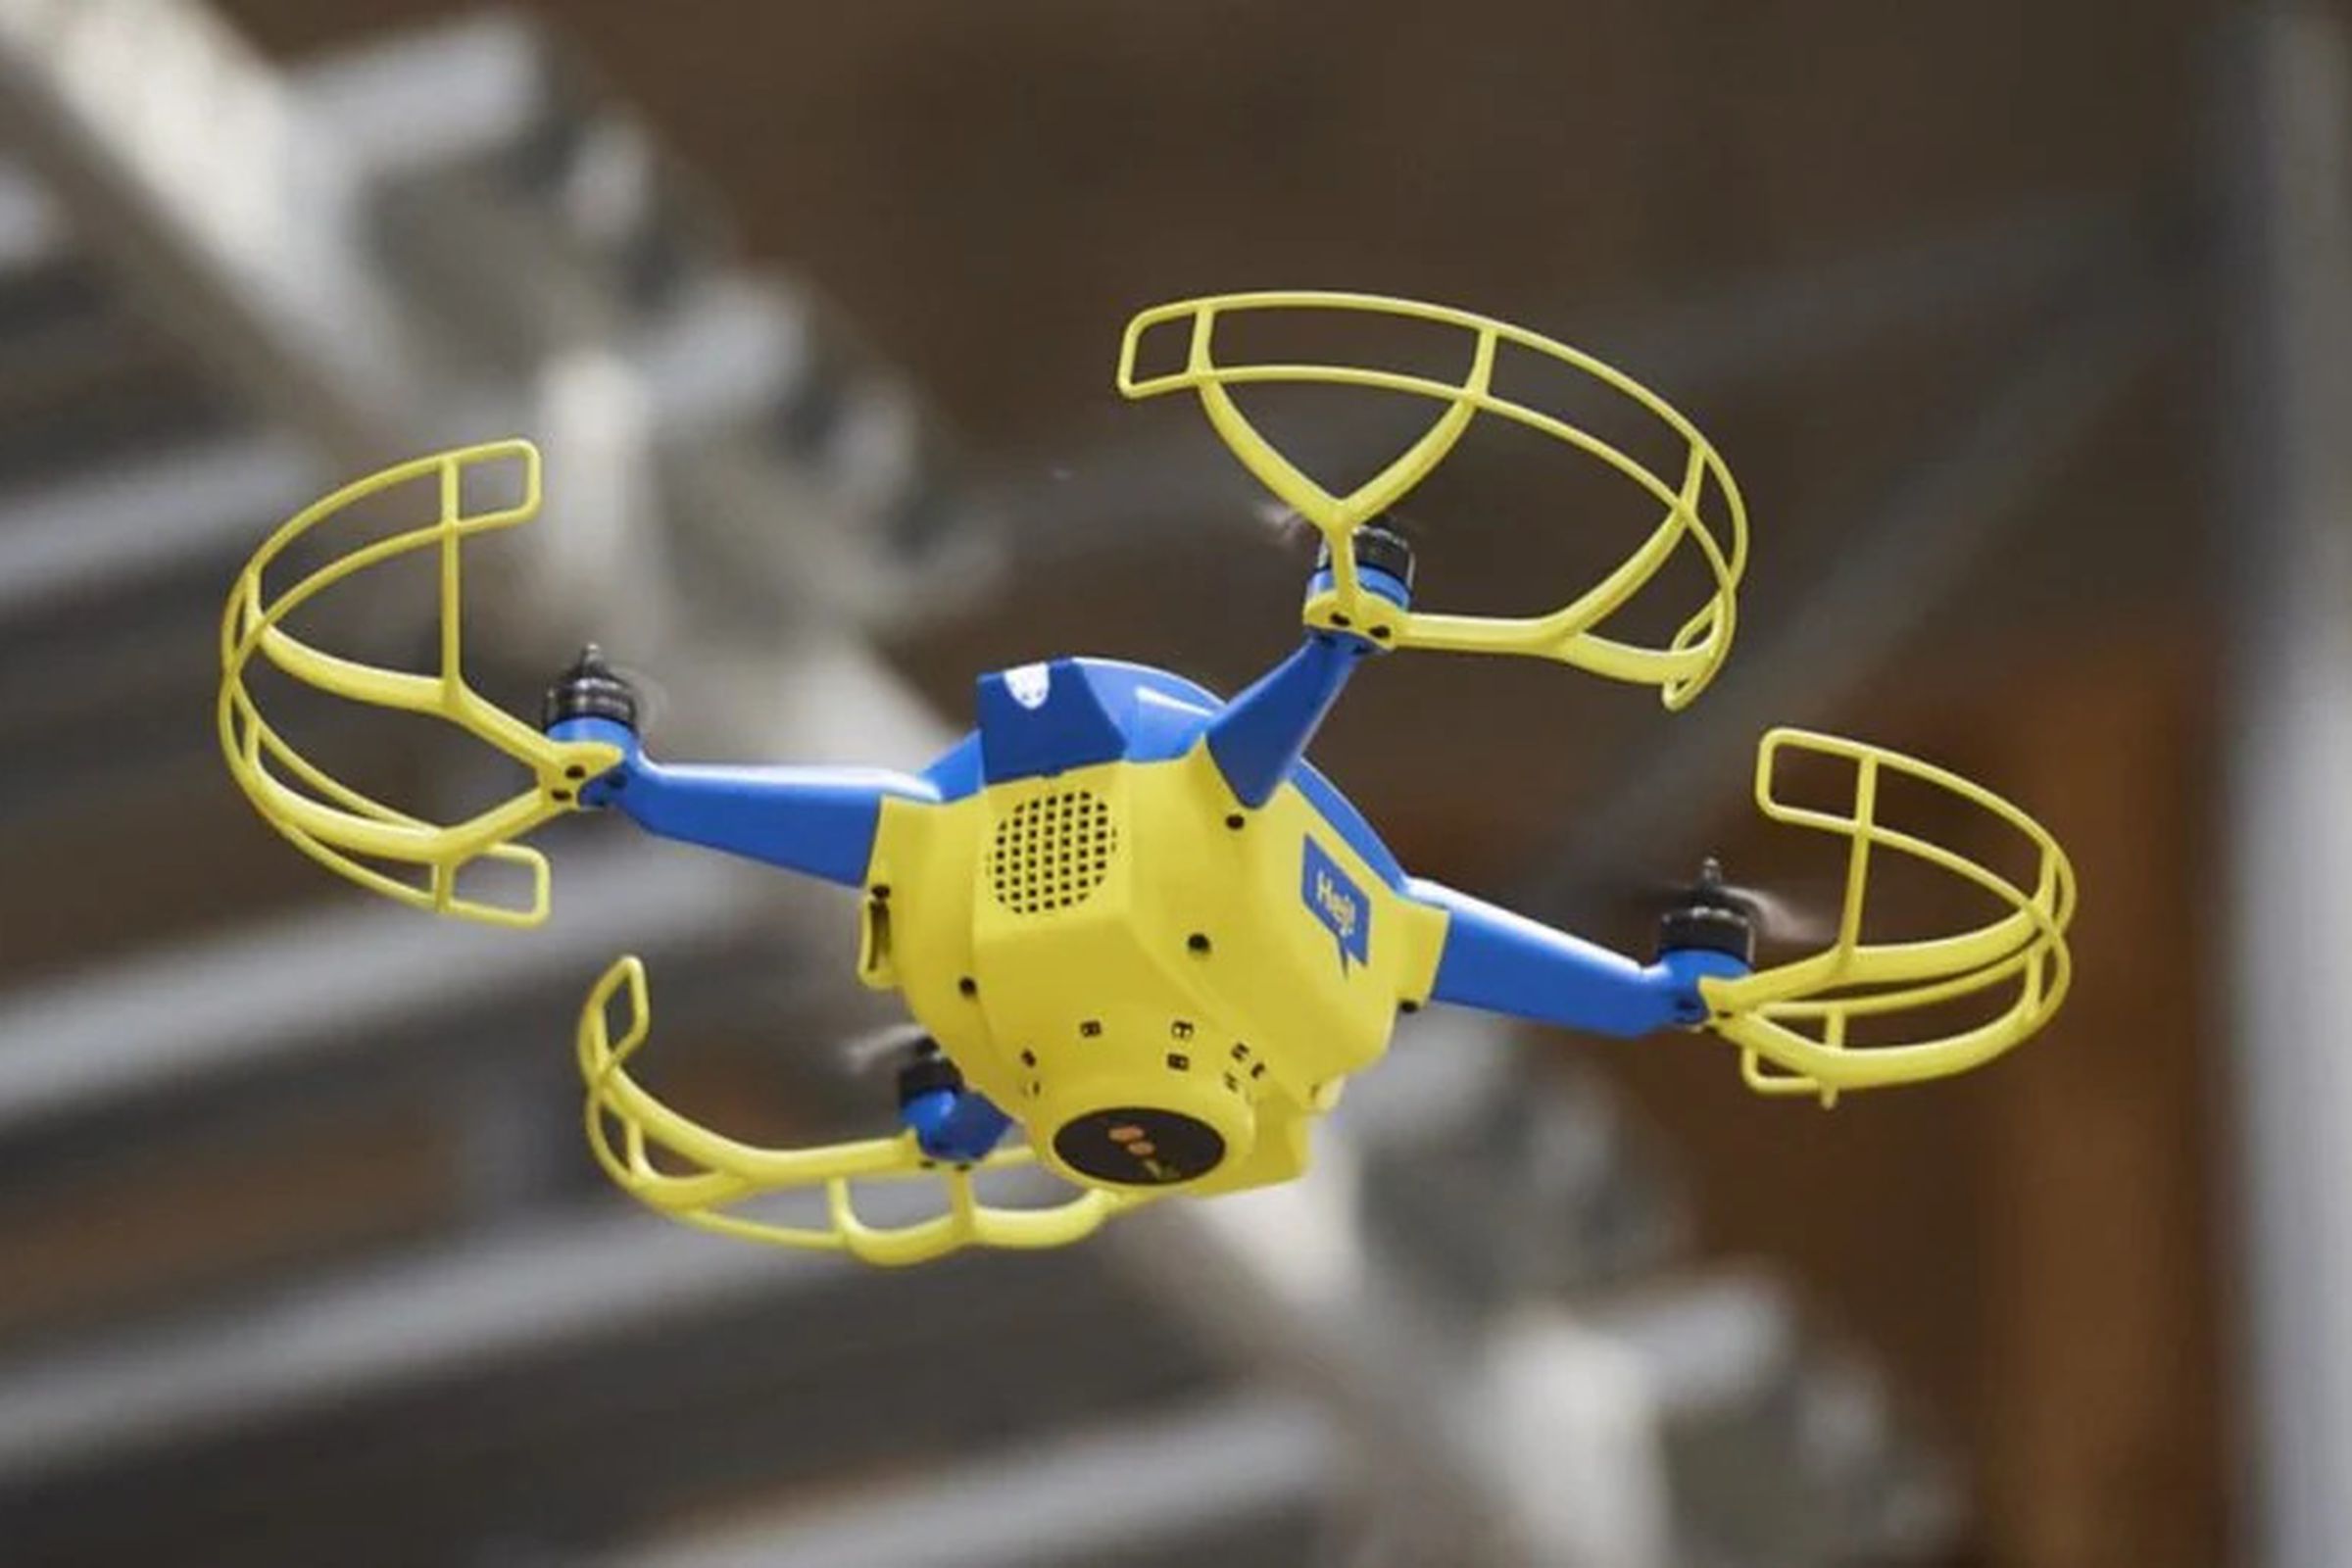 An image showing a blue and yellow drone in mid-air